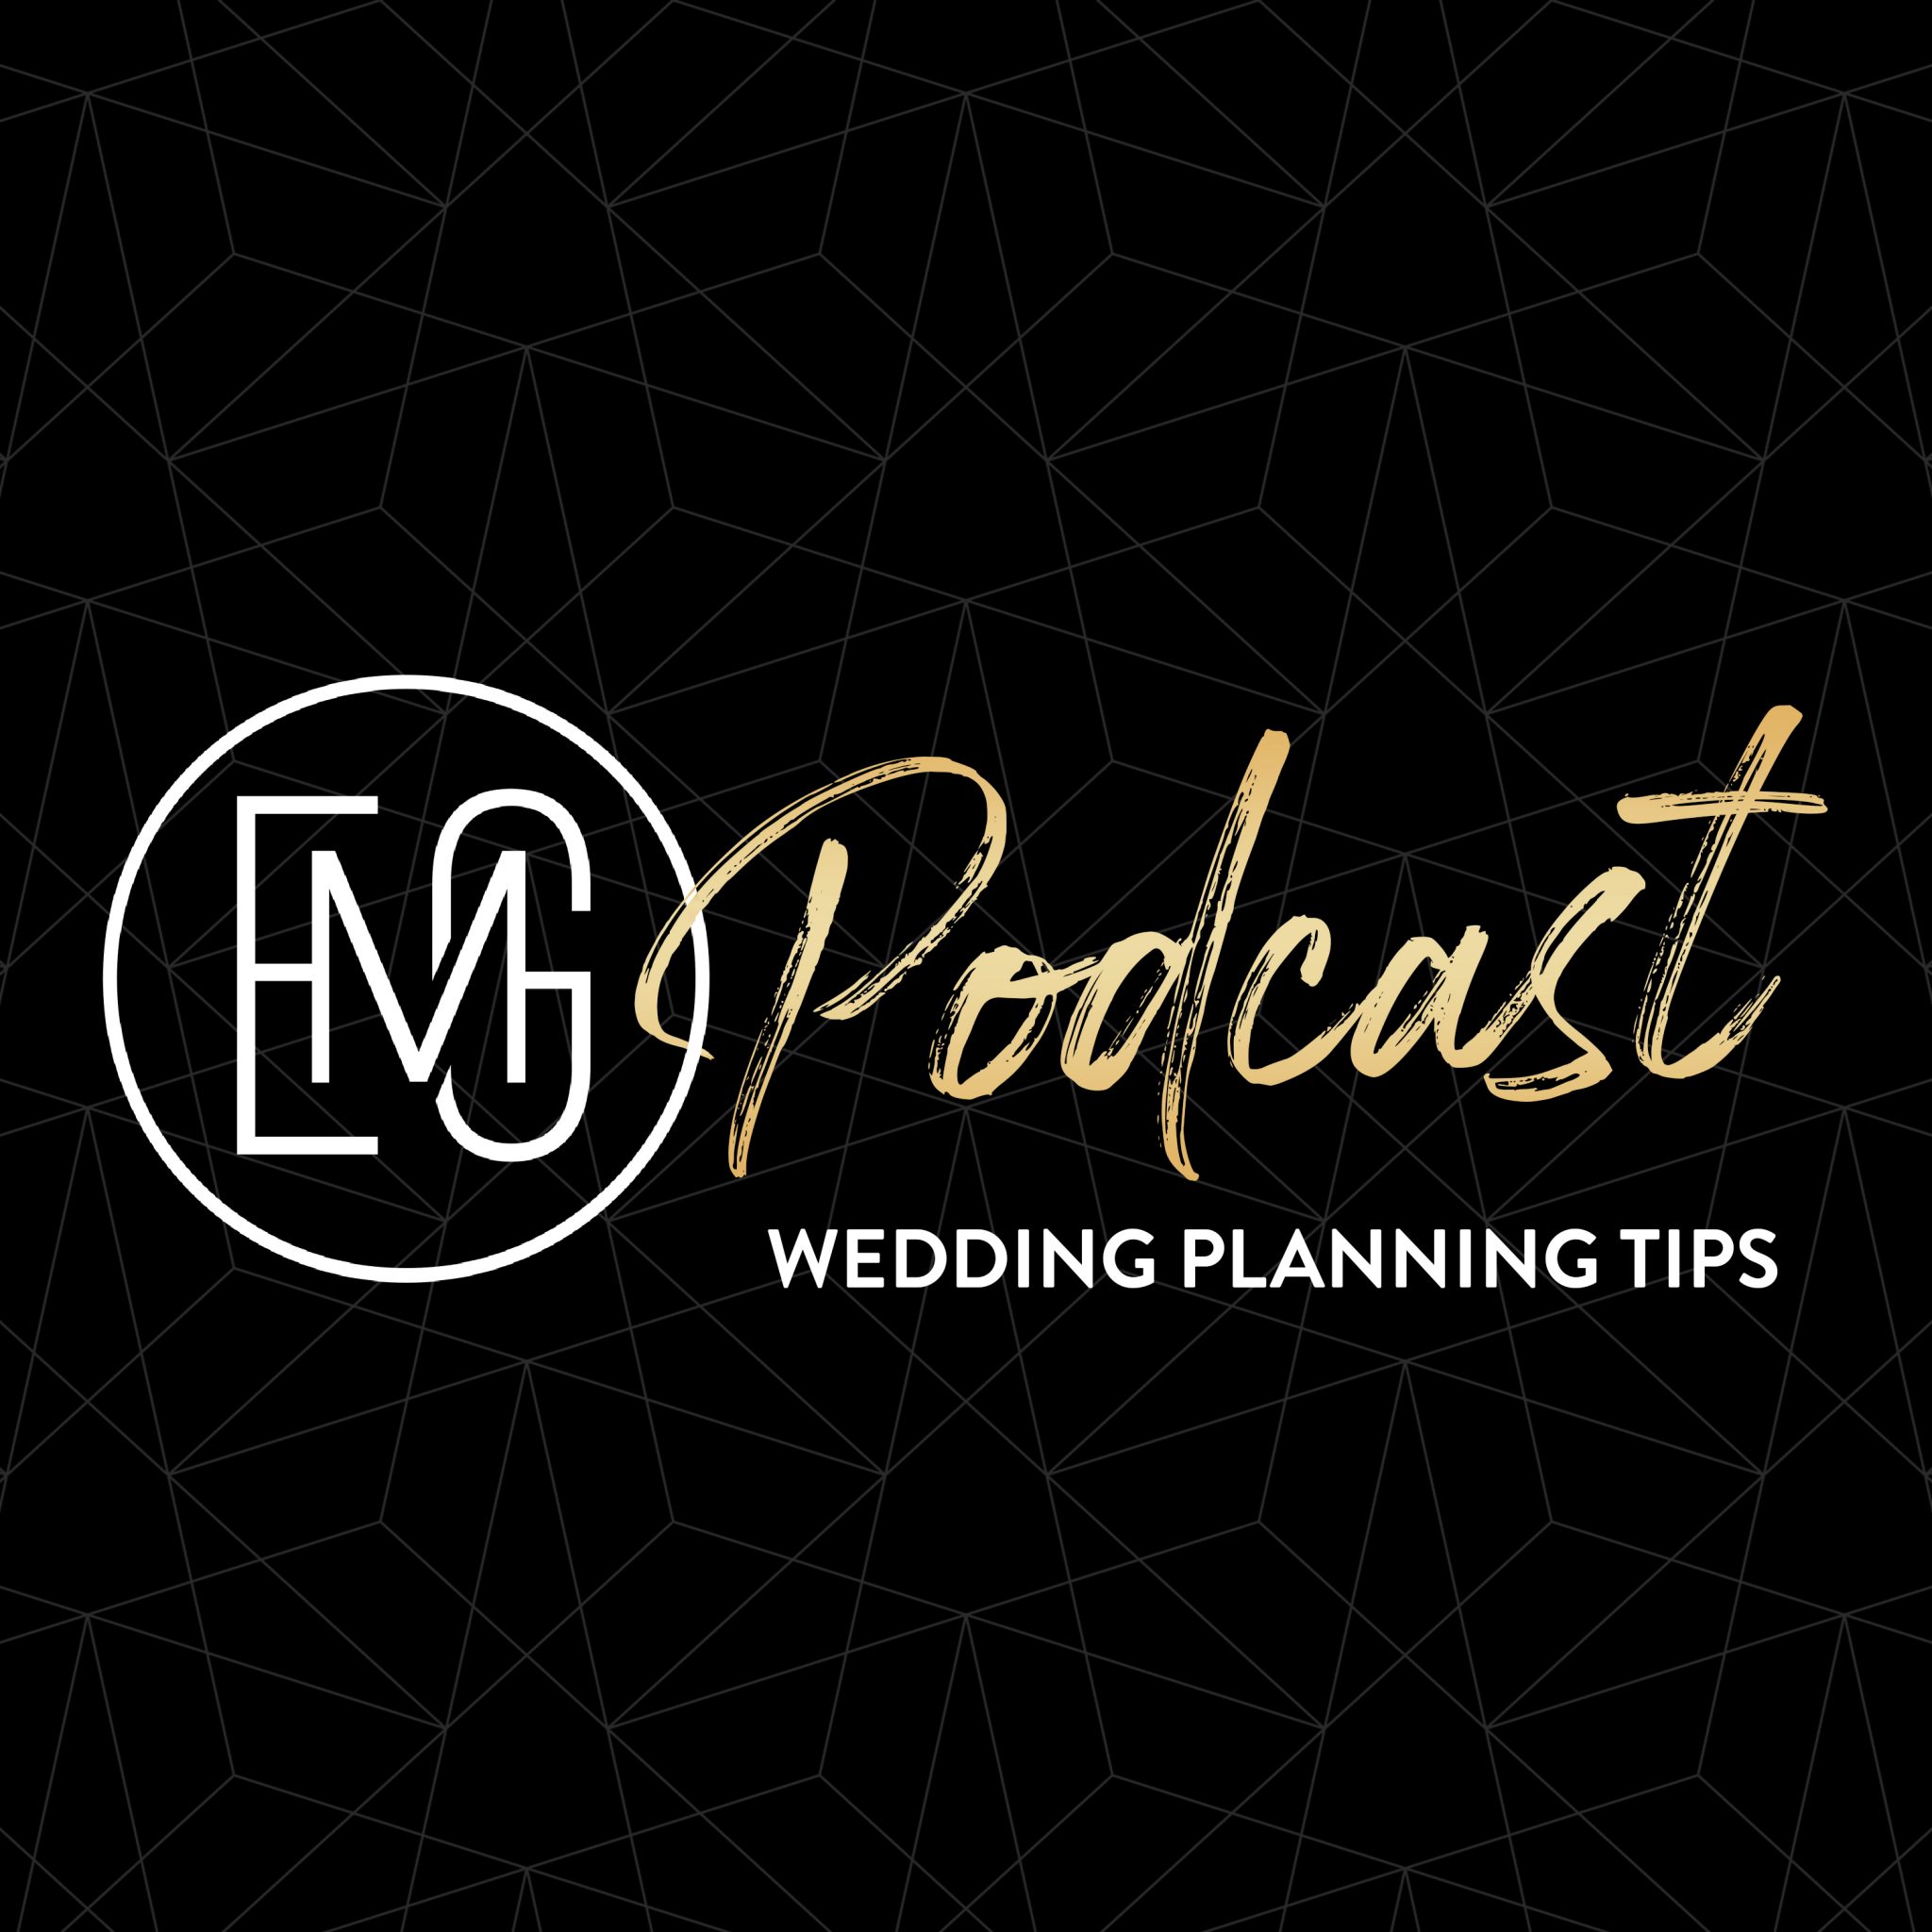 Planning Tips: The Week Of